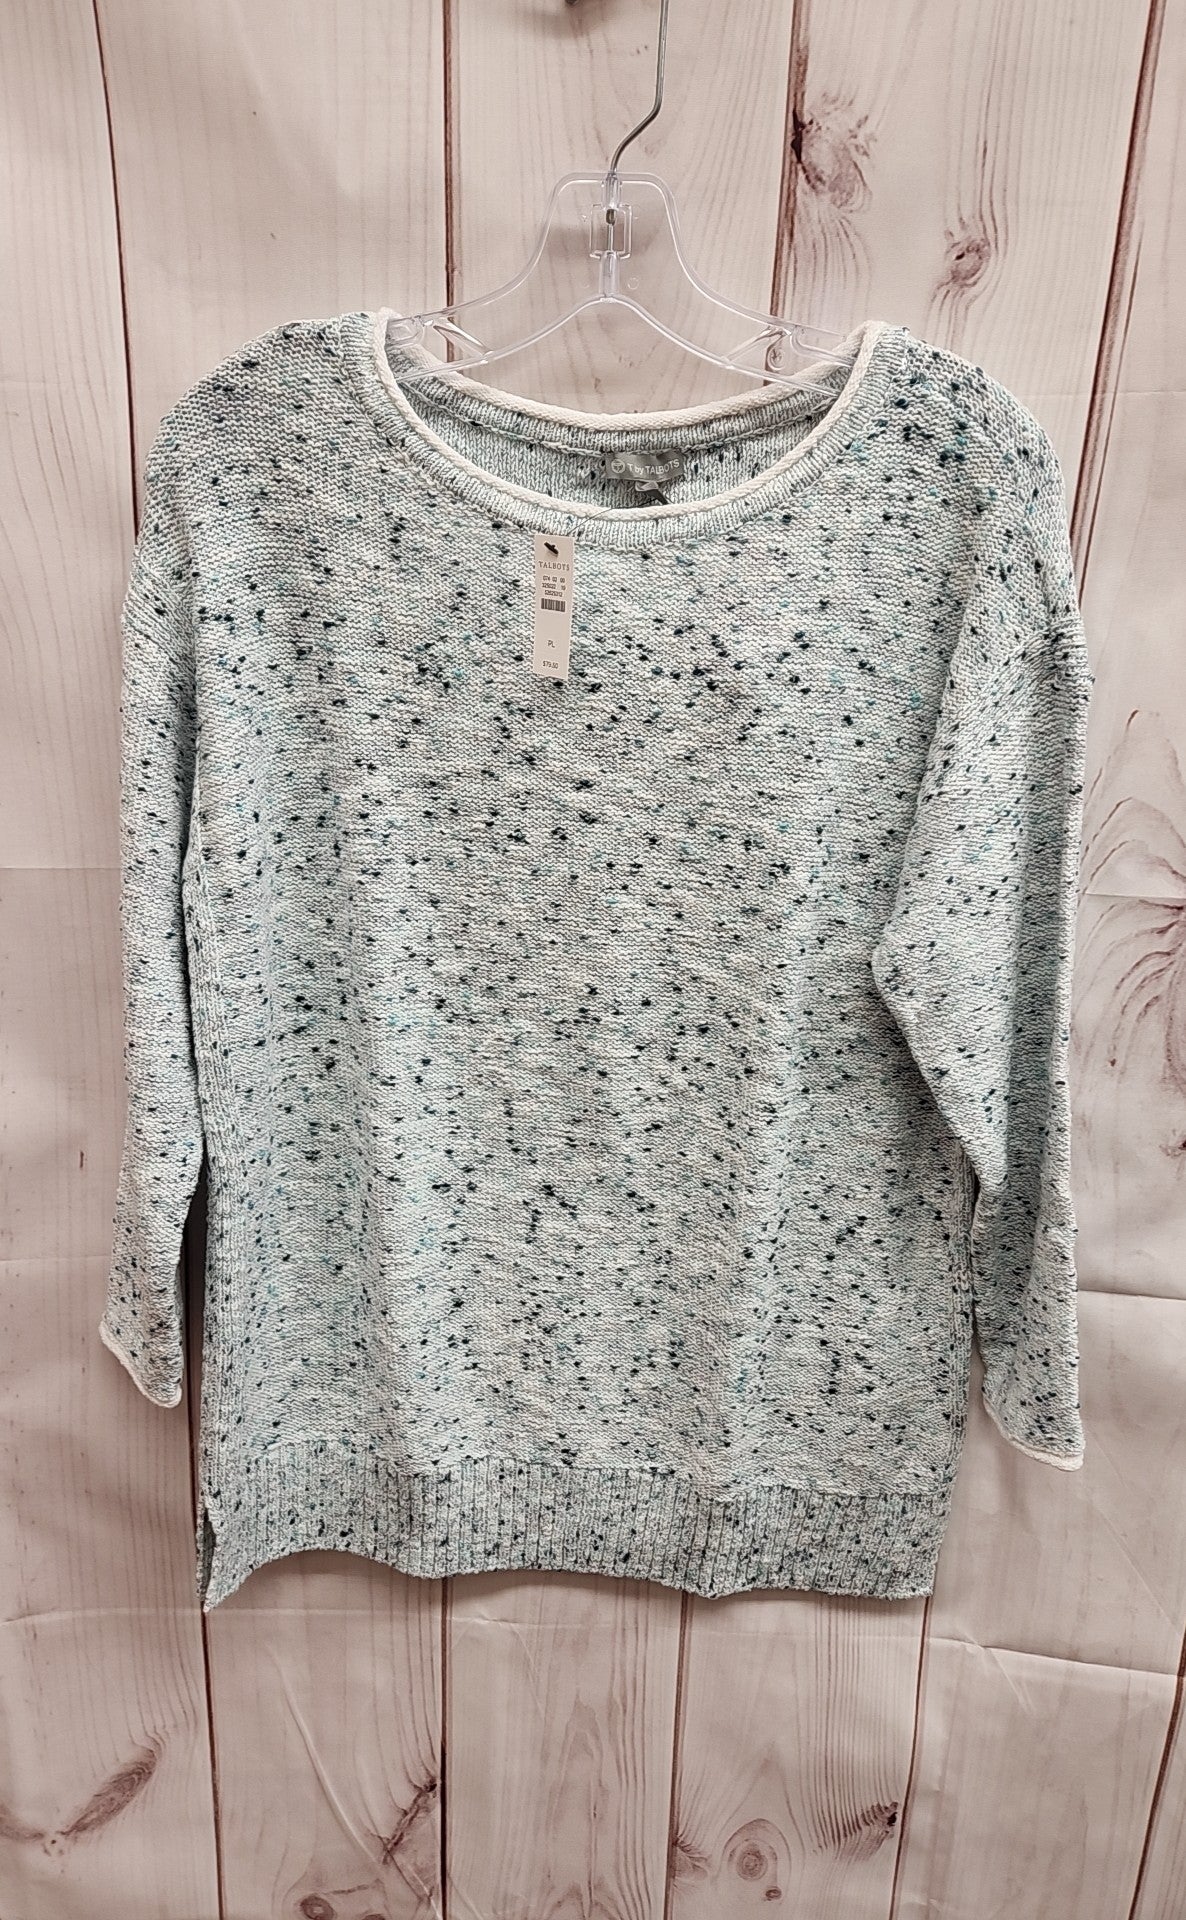 Talbots Women's Size L Petite Turquoise Sweater NWT